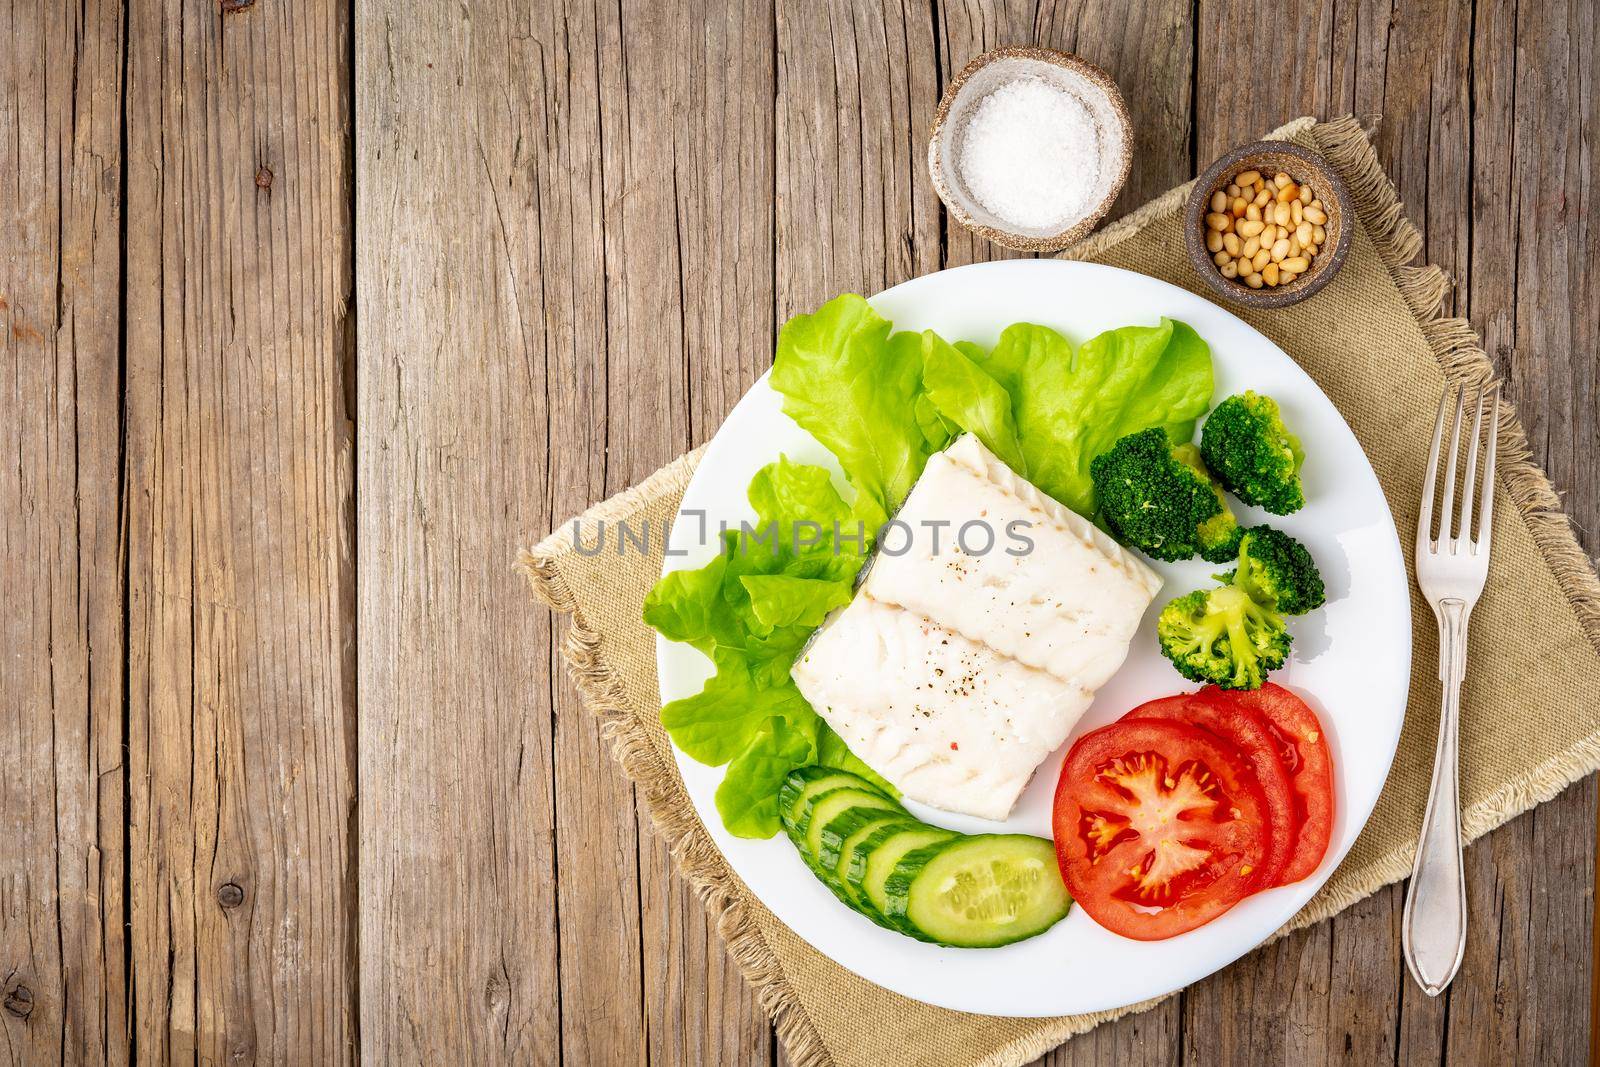 Steamed cod fish. Paleo, keto, fodmap healthy diet with vegetables on white plate on white table, side view.